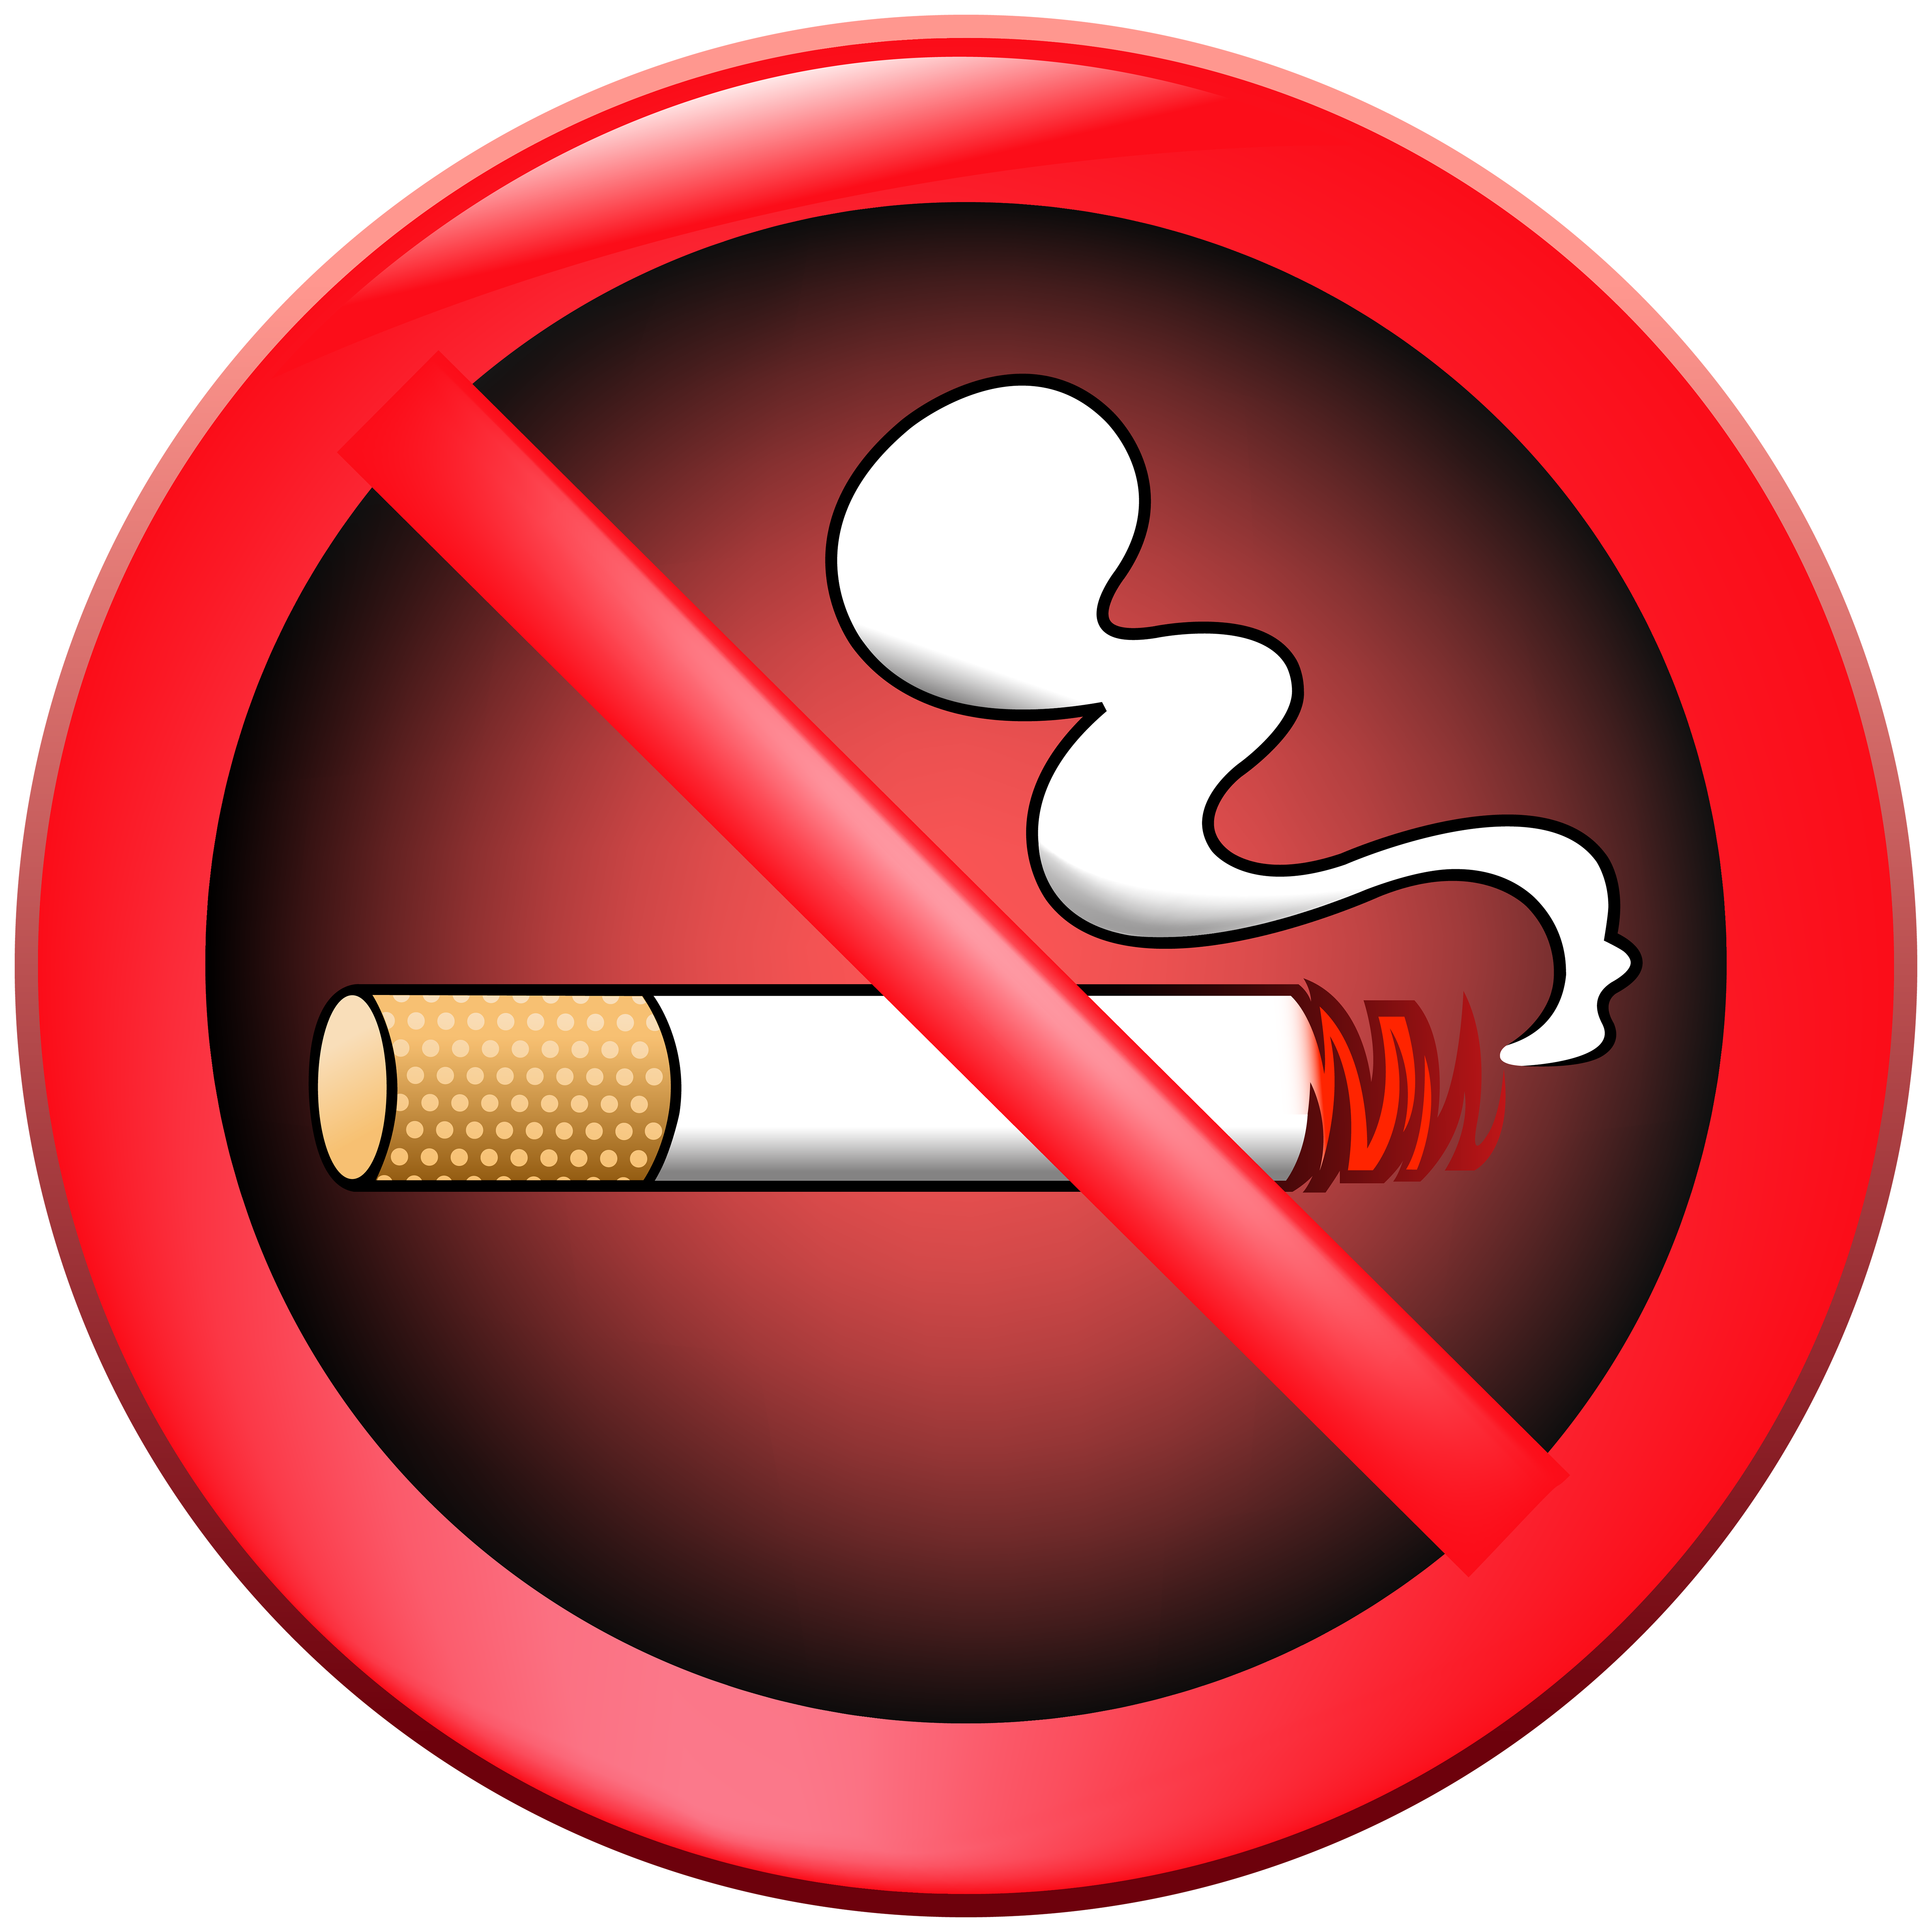 No Smoking Prohibition Sign PNG Clipart.